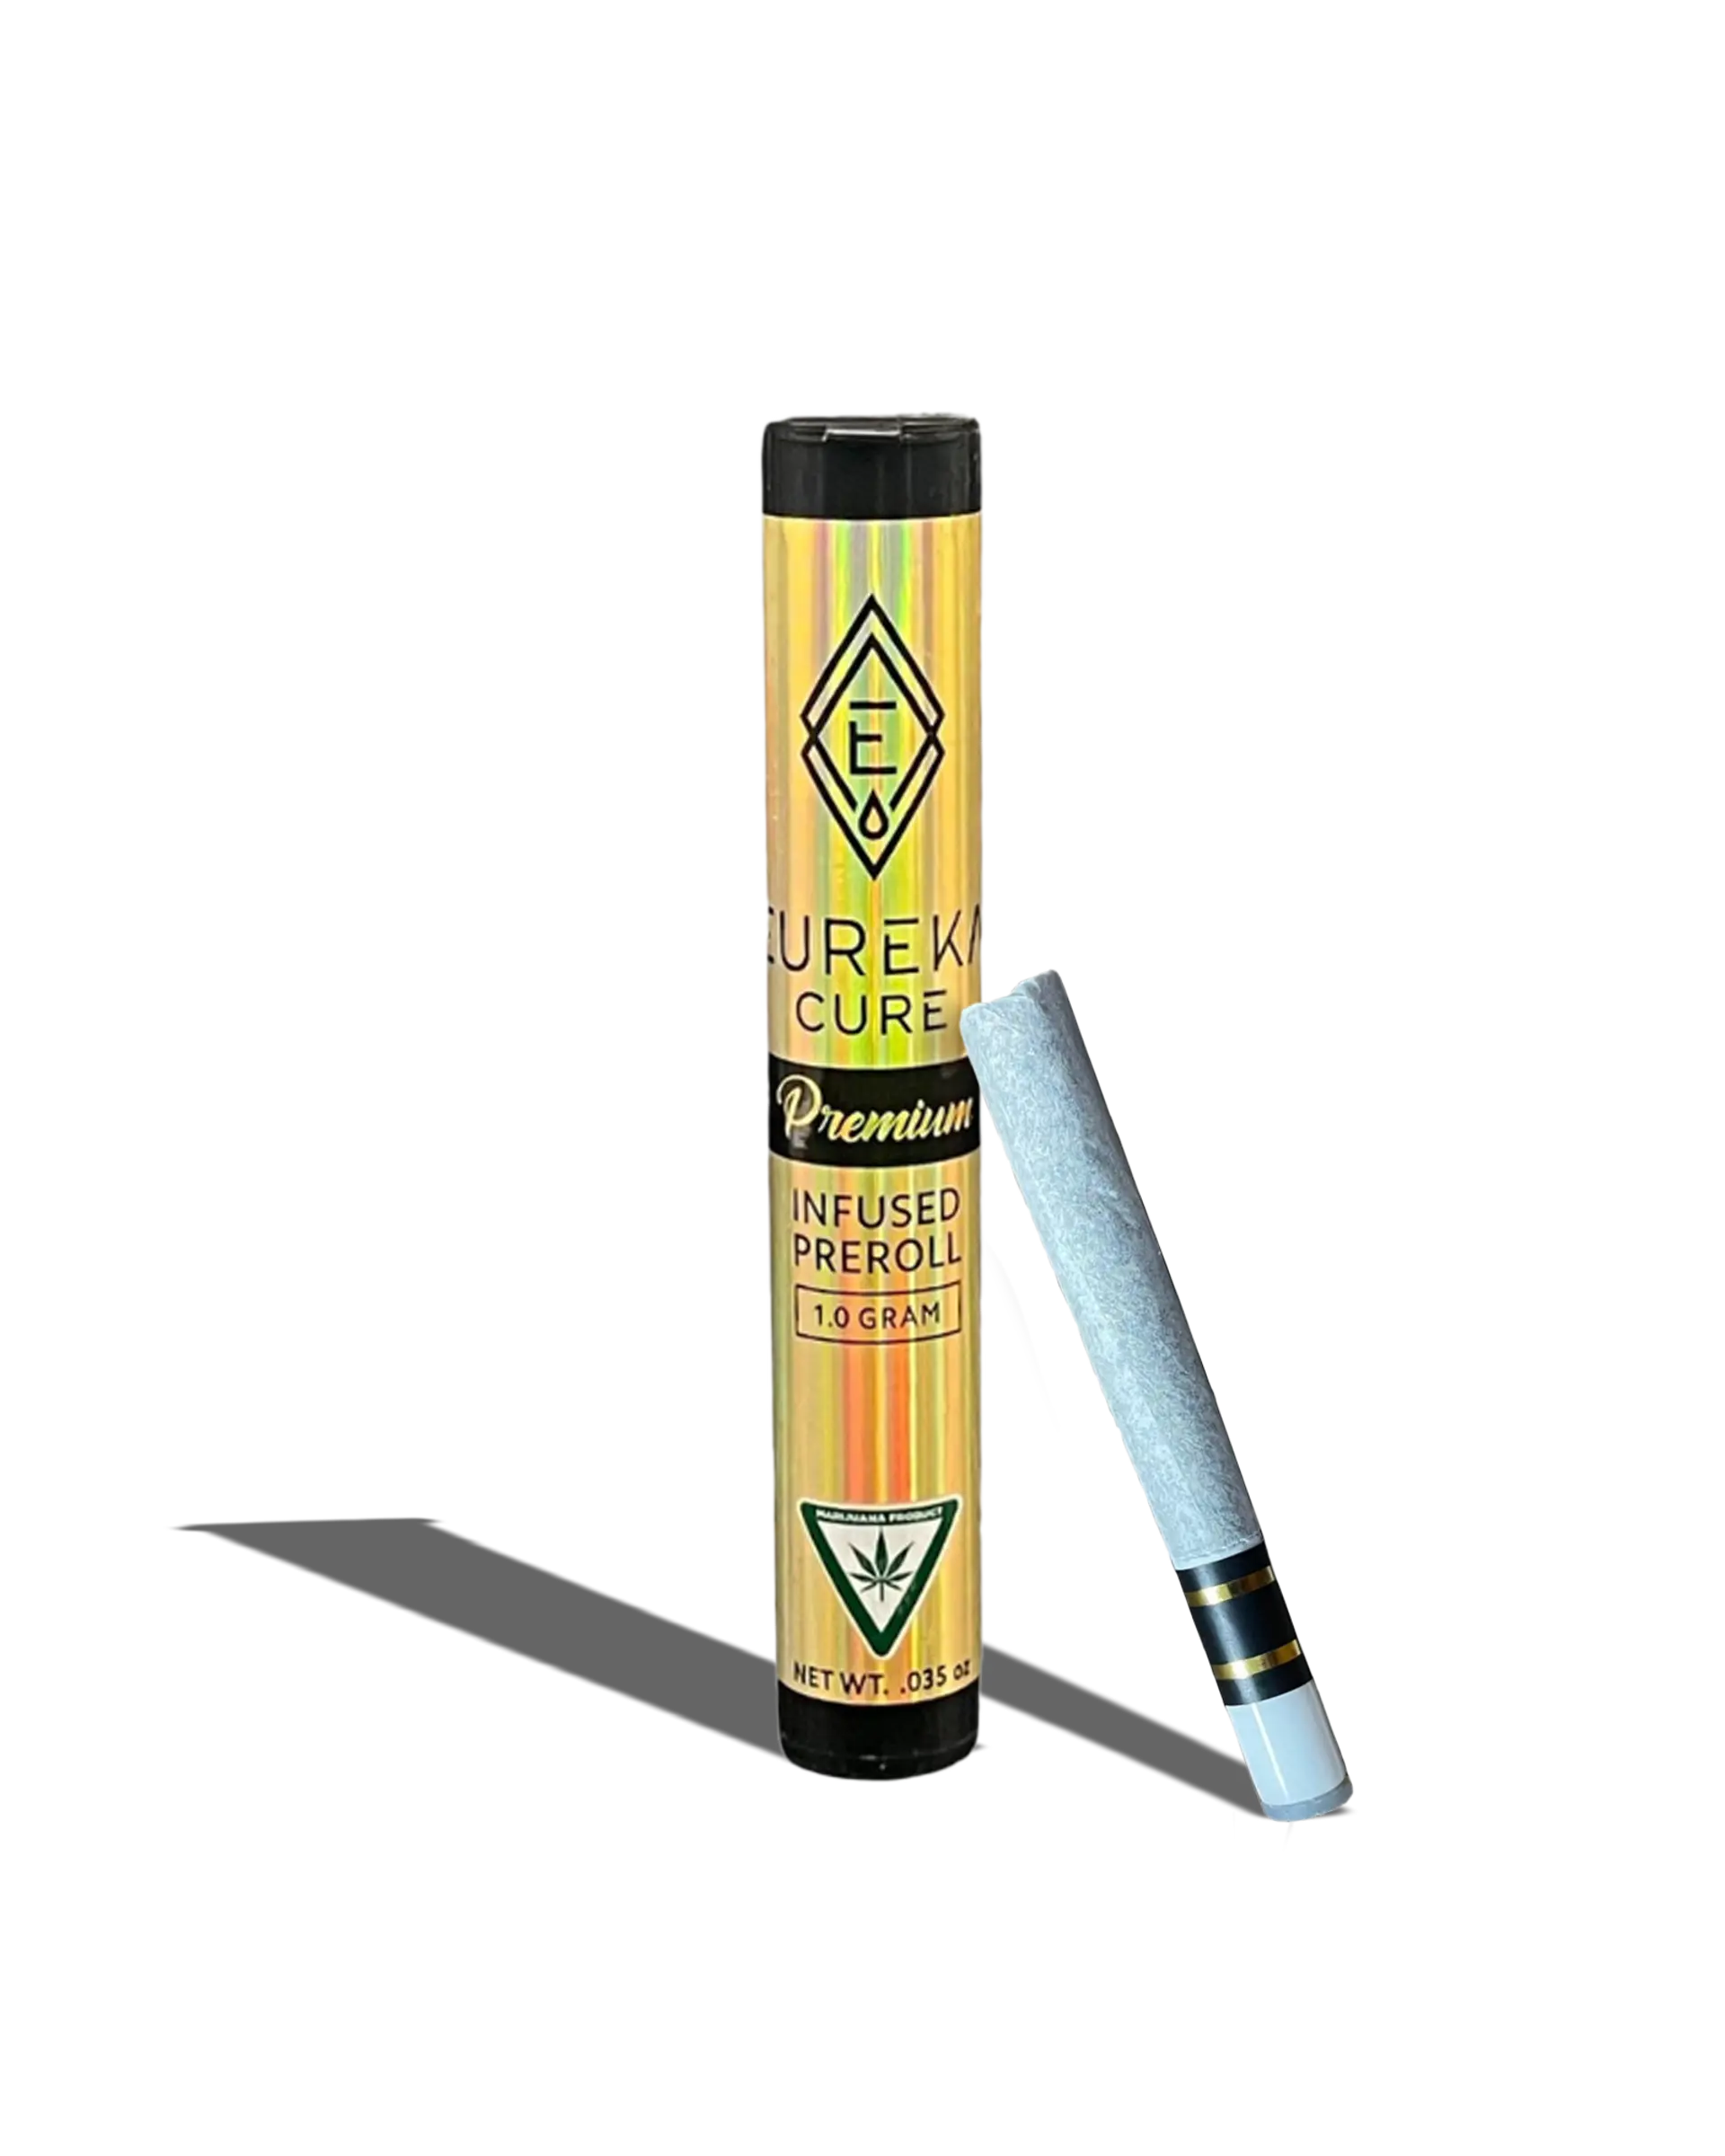 Queso Perro X Garlic Icing Live Resin Infused Preroll 1g, 1 of 1